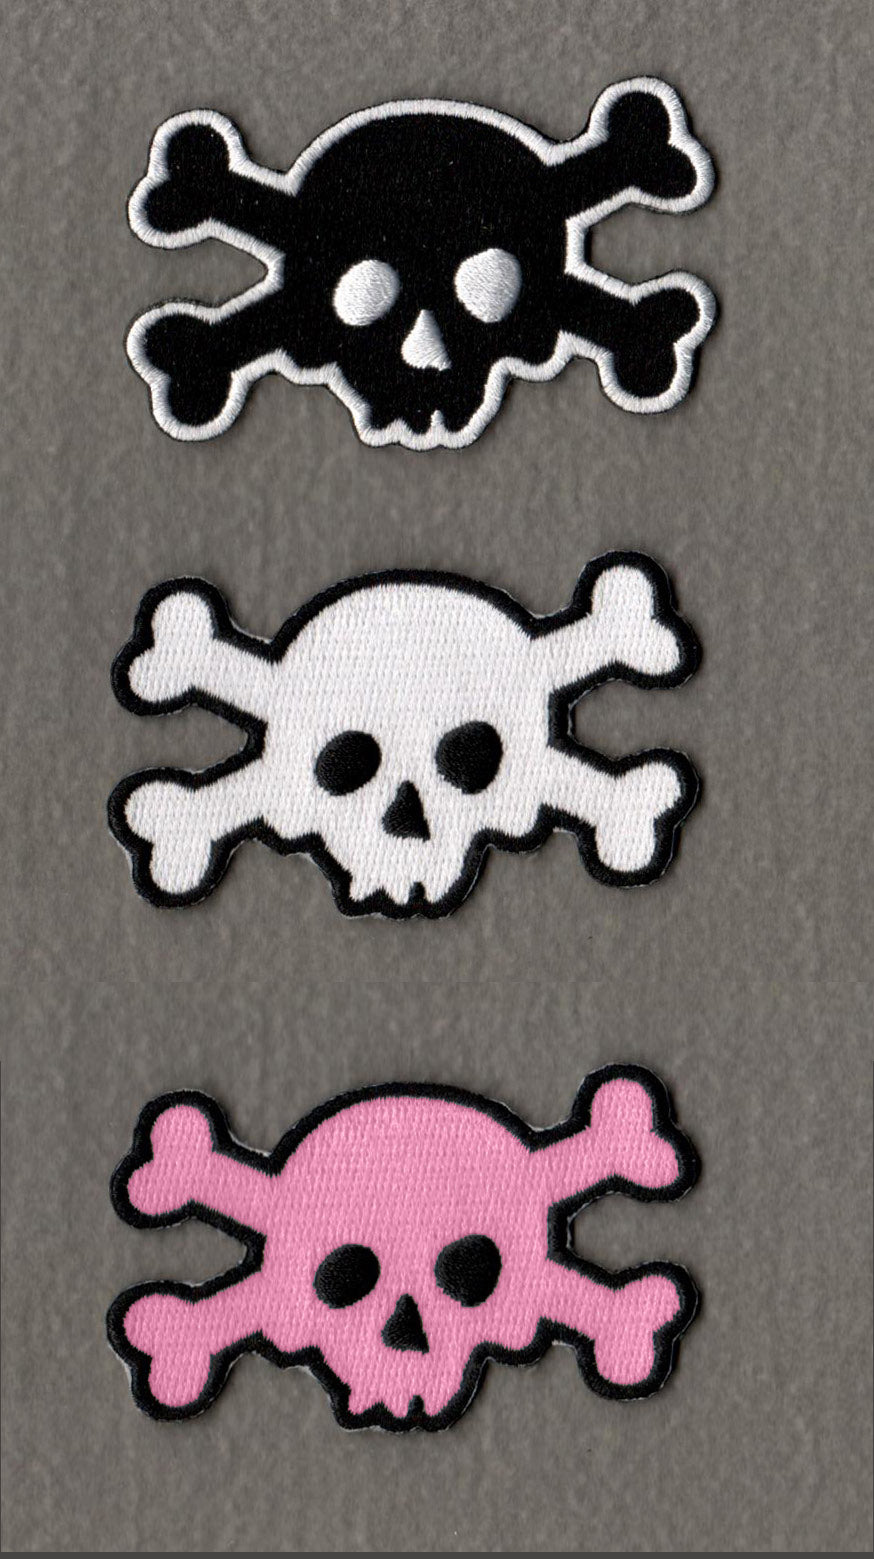 Patch: Skull Cut-Out